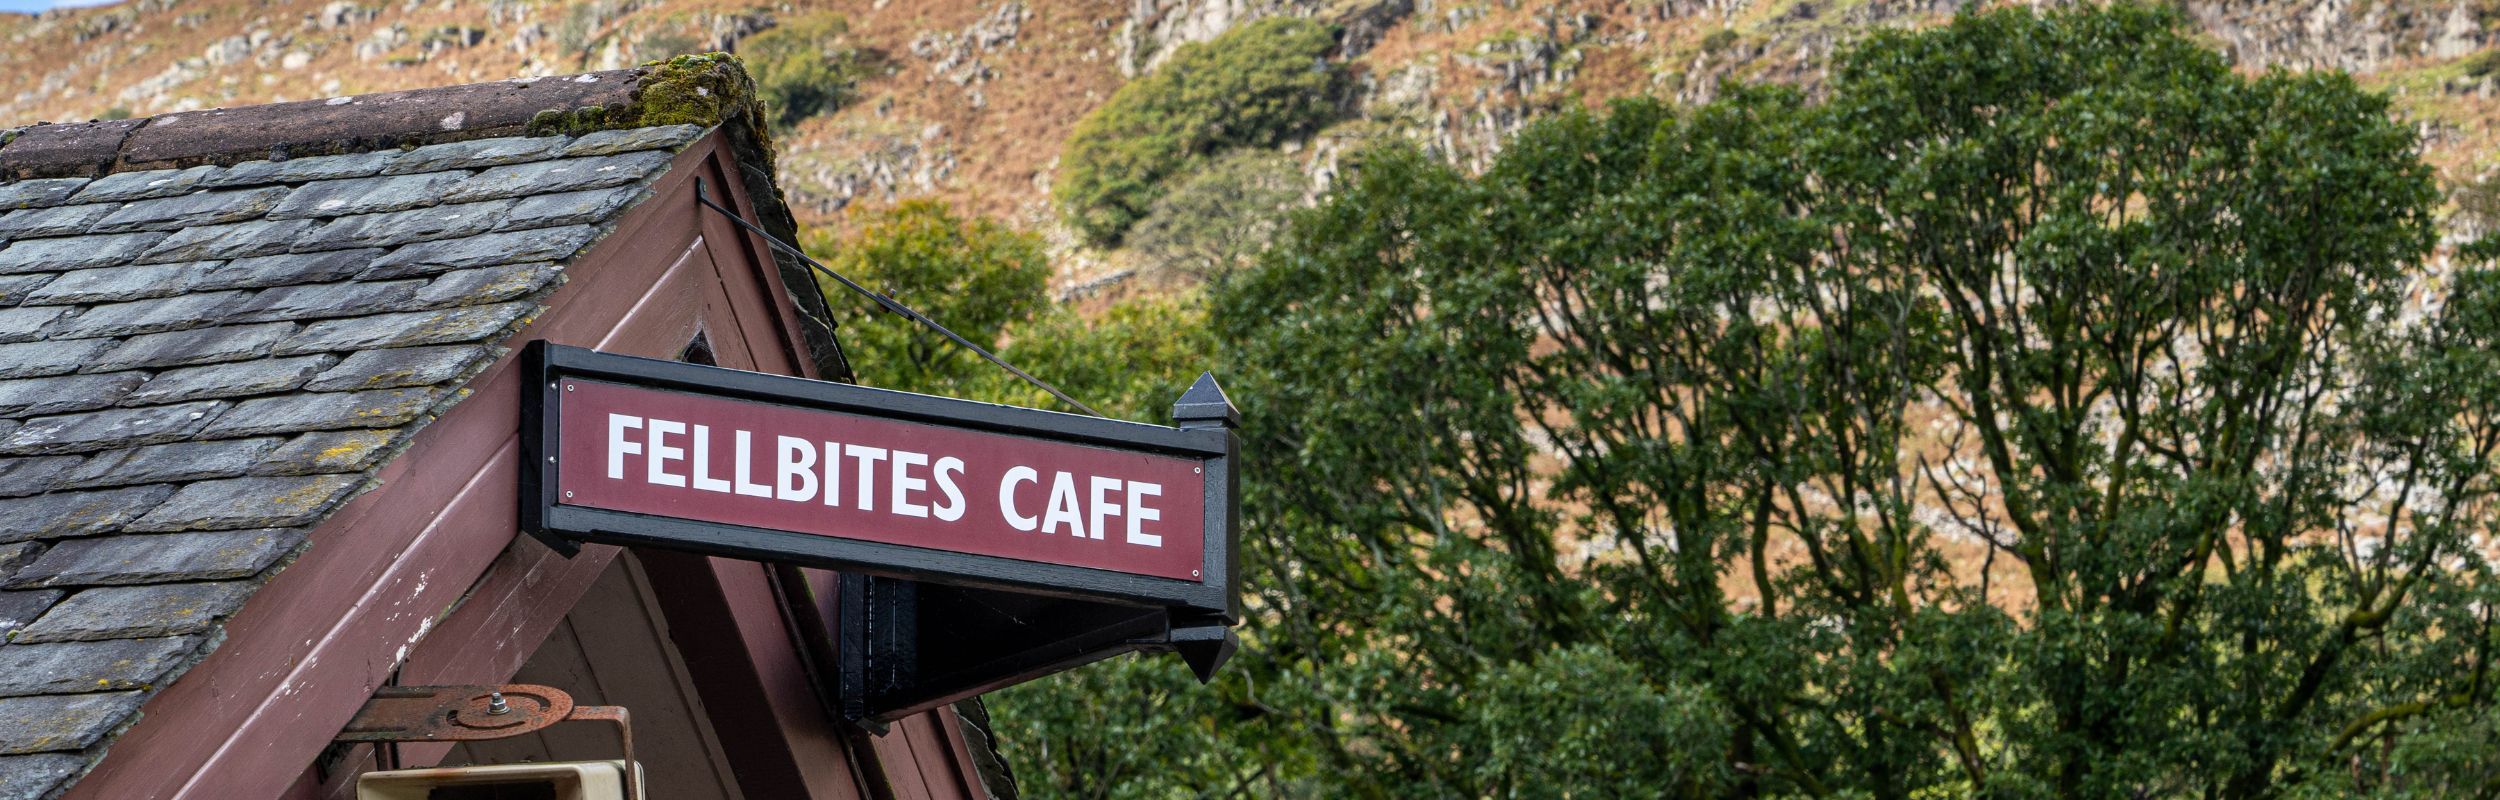 Fellbites cafe, situated at Dalegarth Station at the Ravenglass and Eskdale Railway